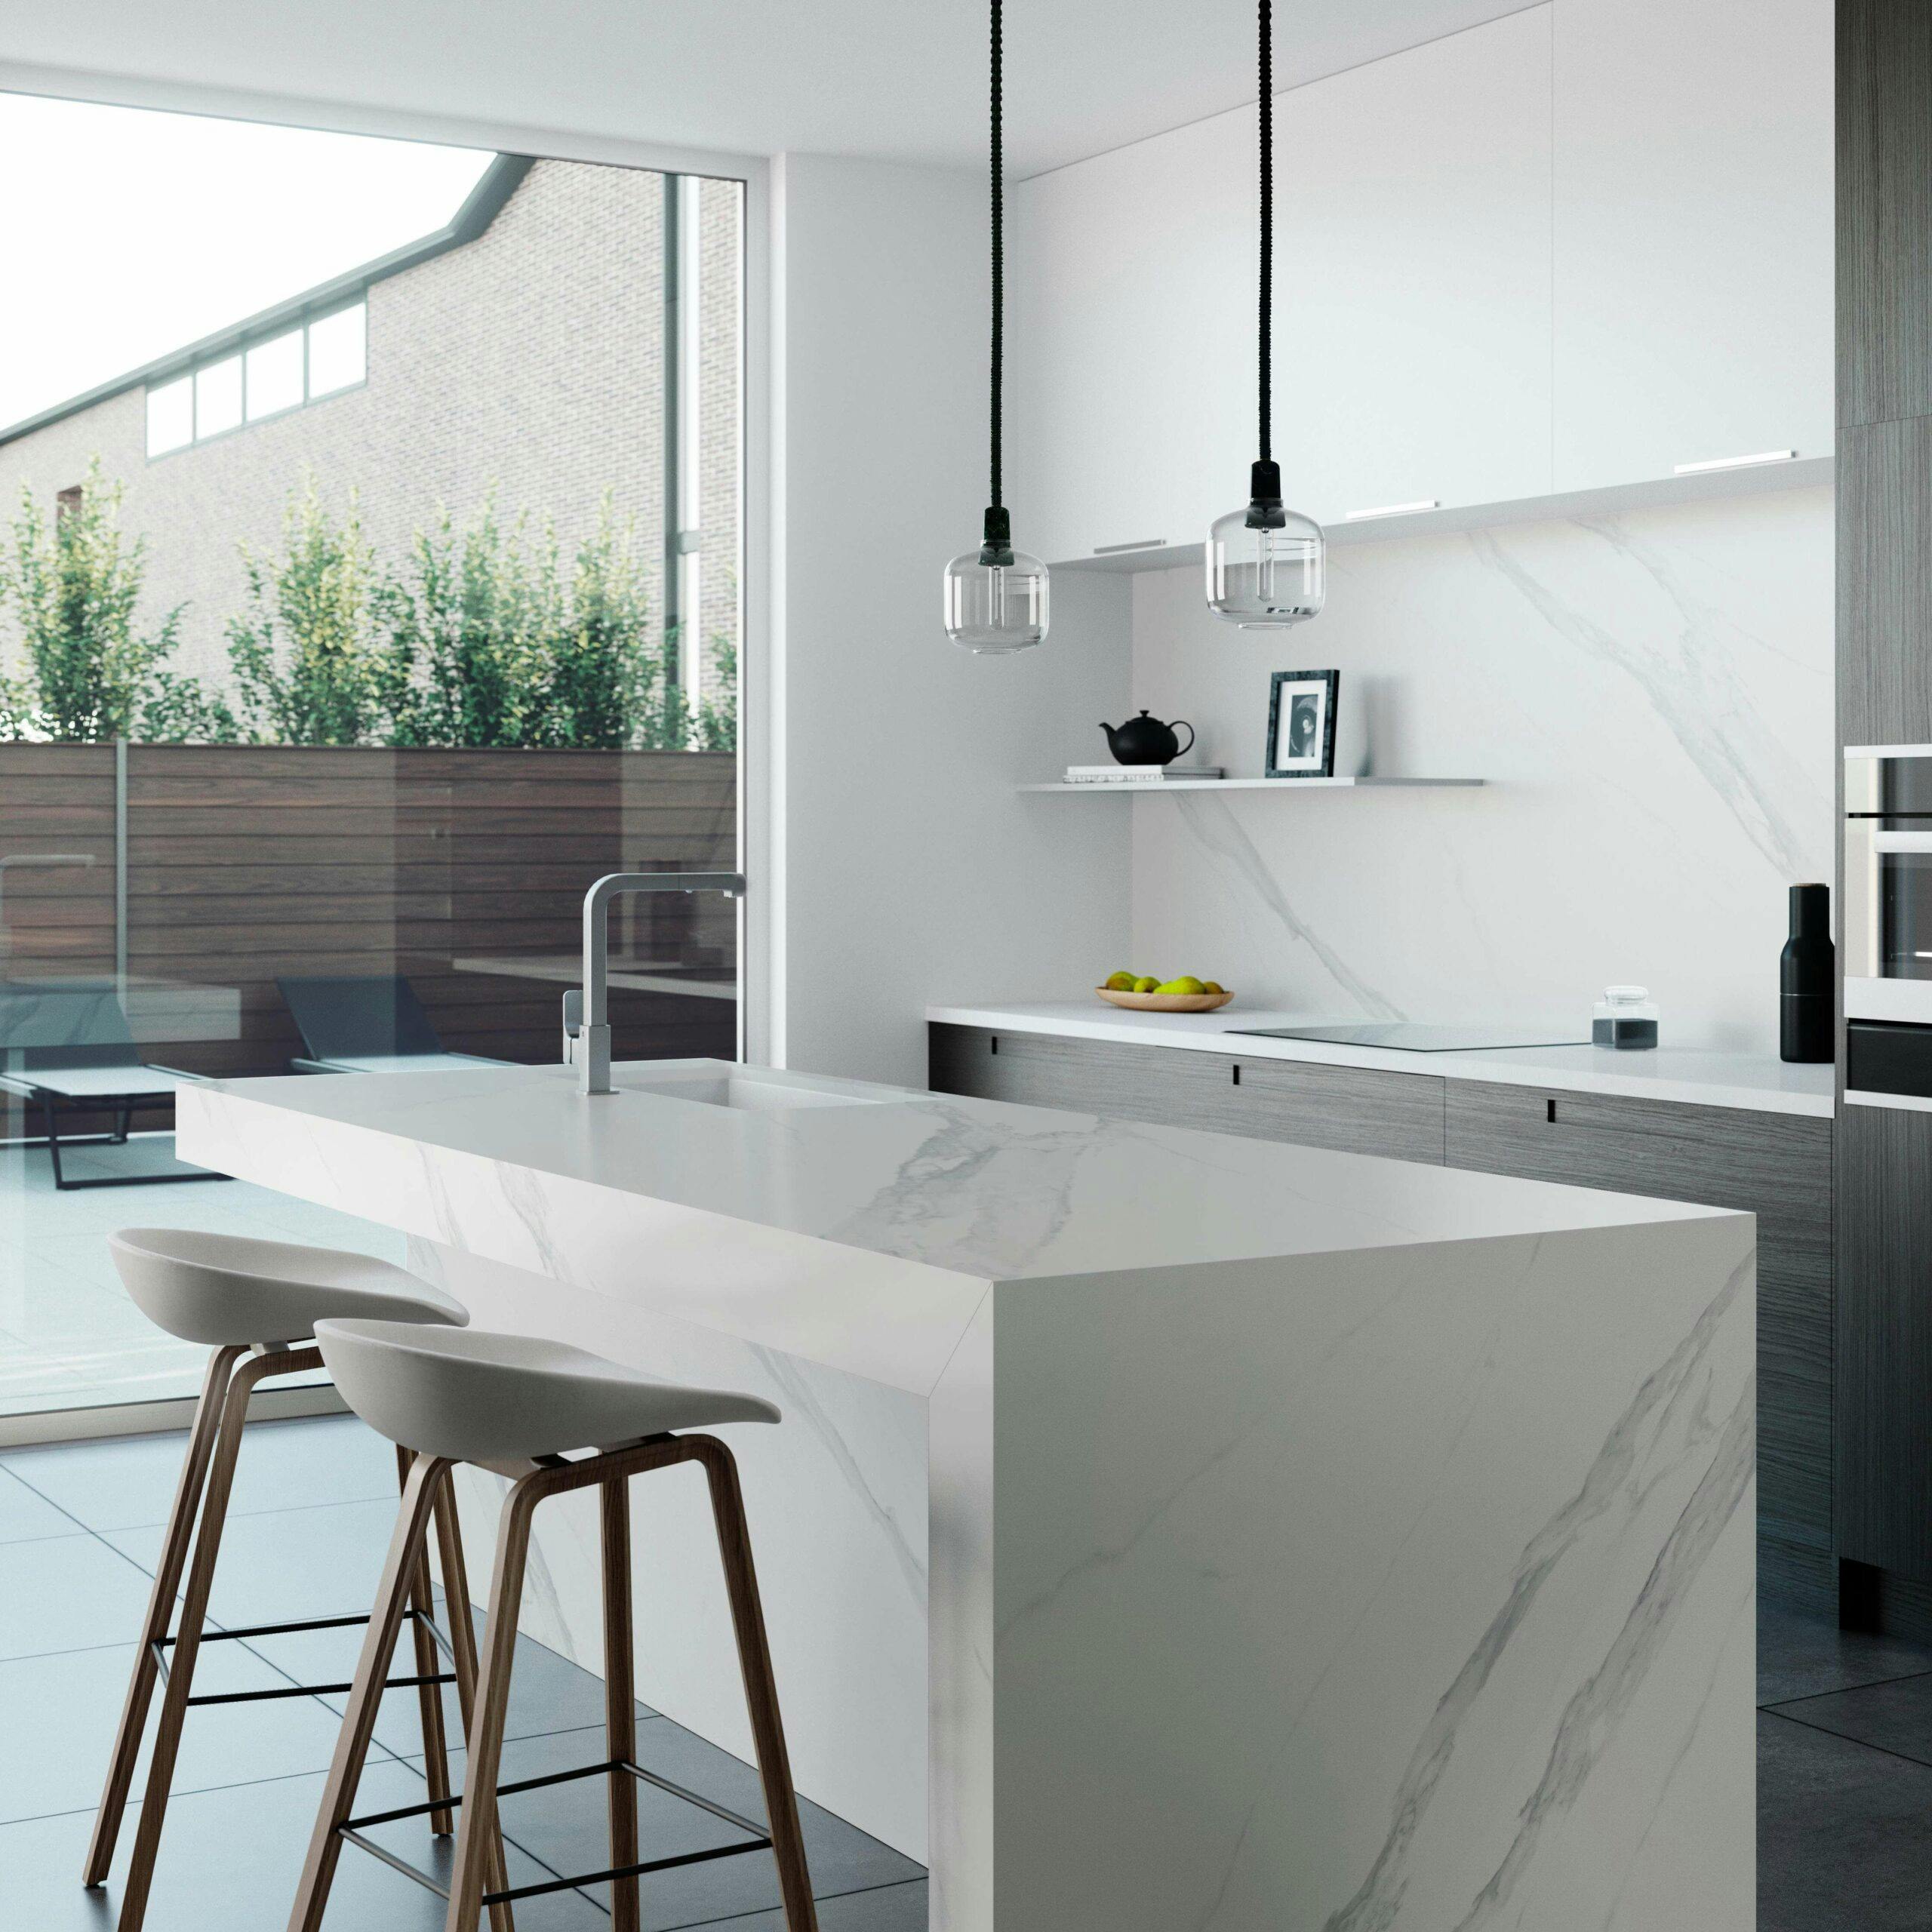 The Purity and Architectural Beauty of Travertine Marble – Inspiring Luxury Materials